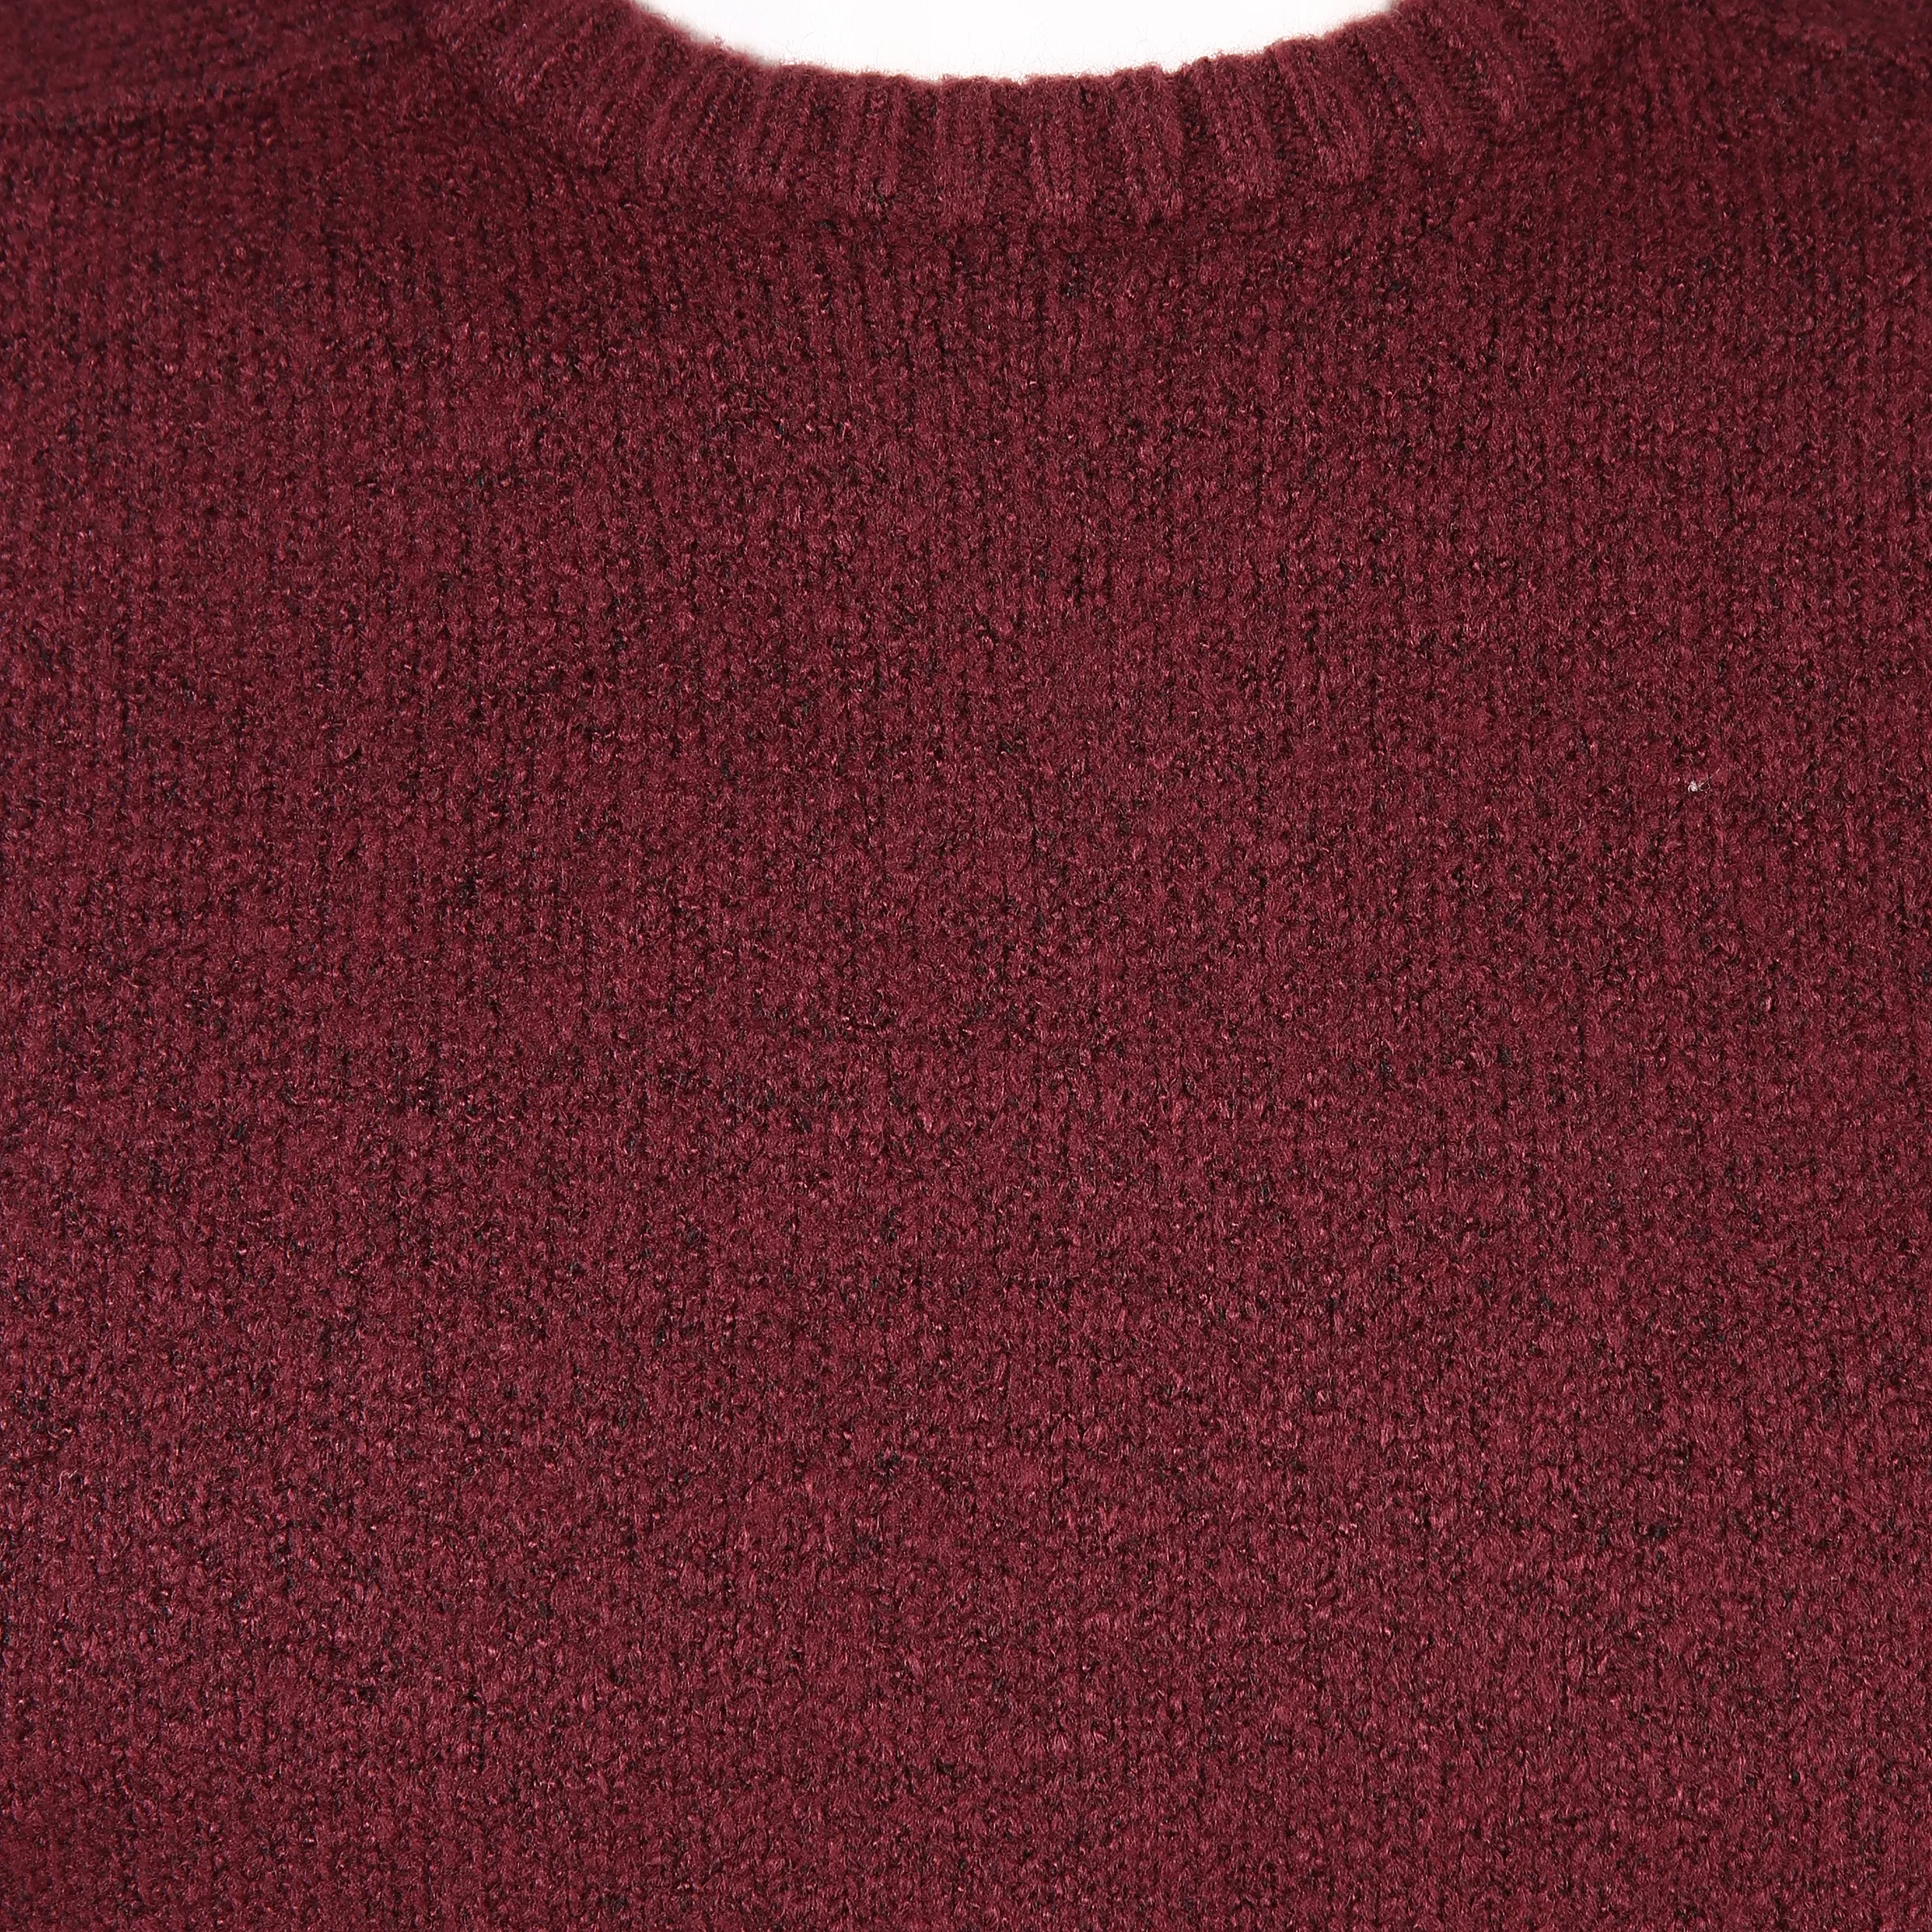 Tom Tailor 1005645 cosy knitted sweater Rot 800010 10308 3